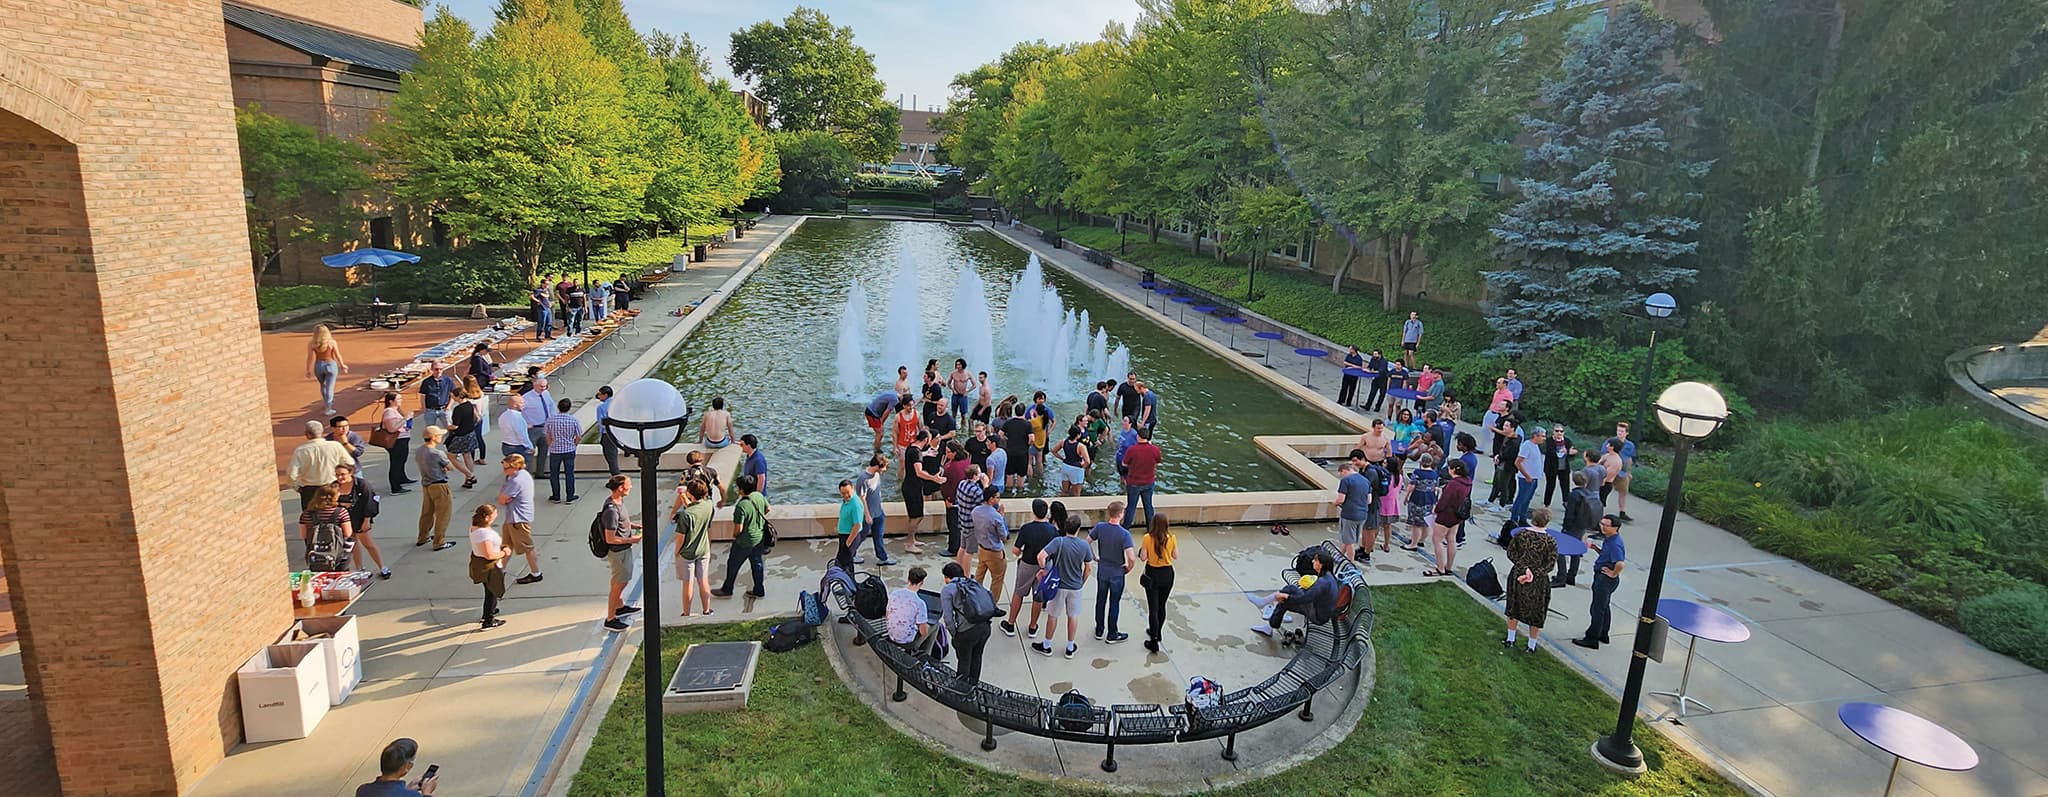 a large group of people standing around and in a fountain pond